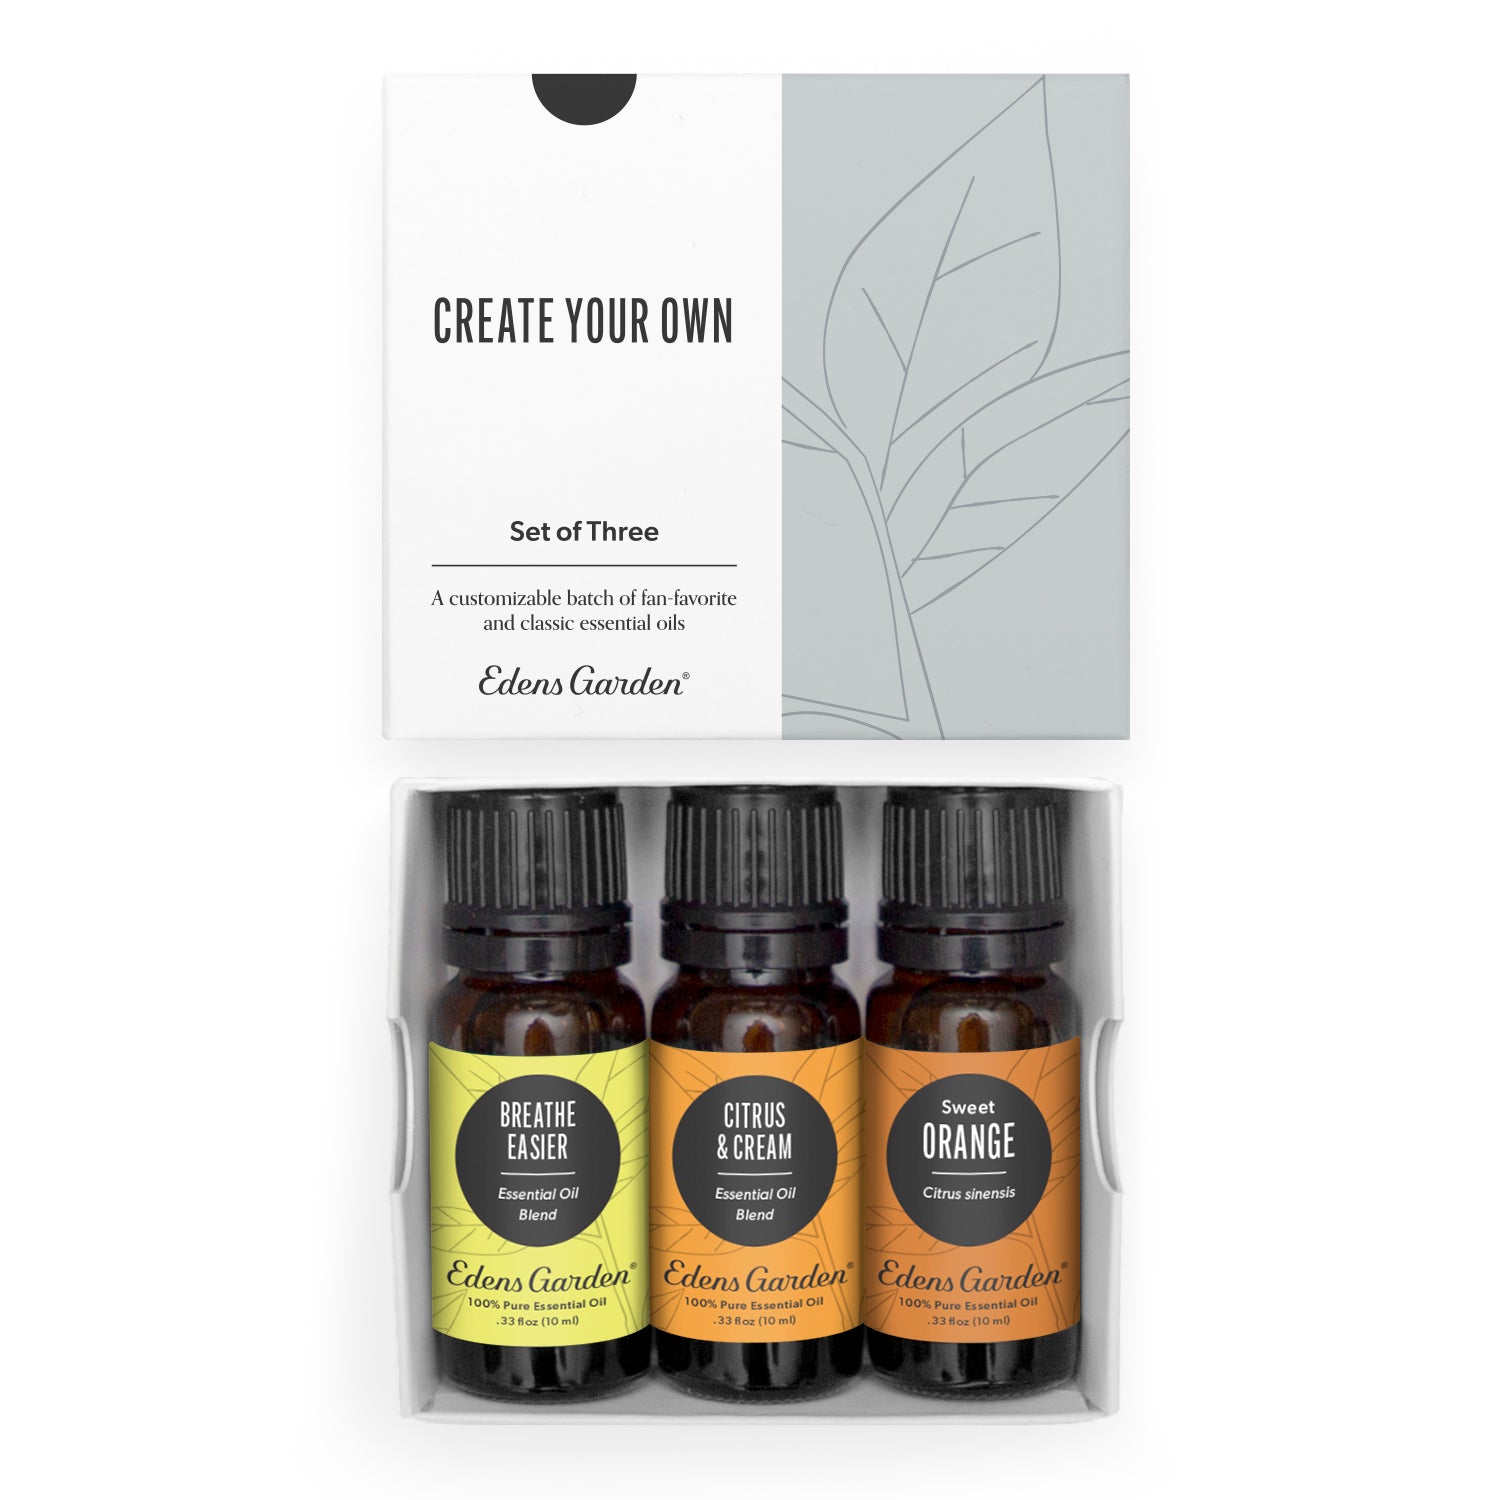 Create Your Own” Essential Oils Set of 3 Oils & Blends